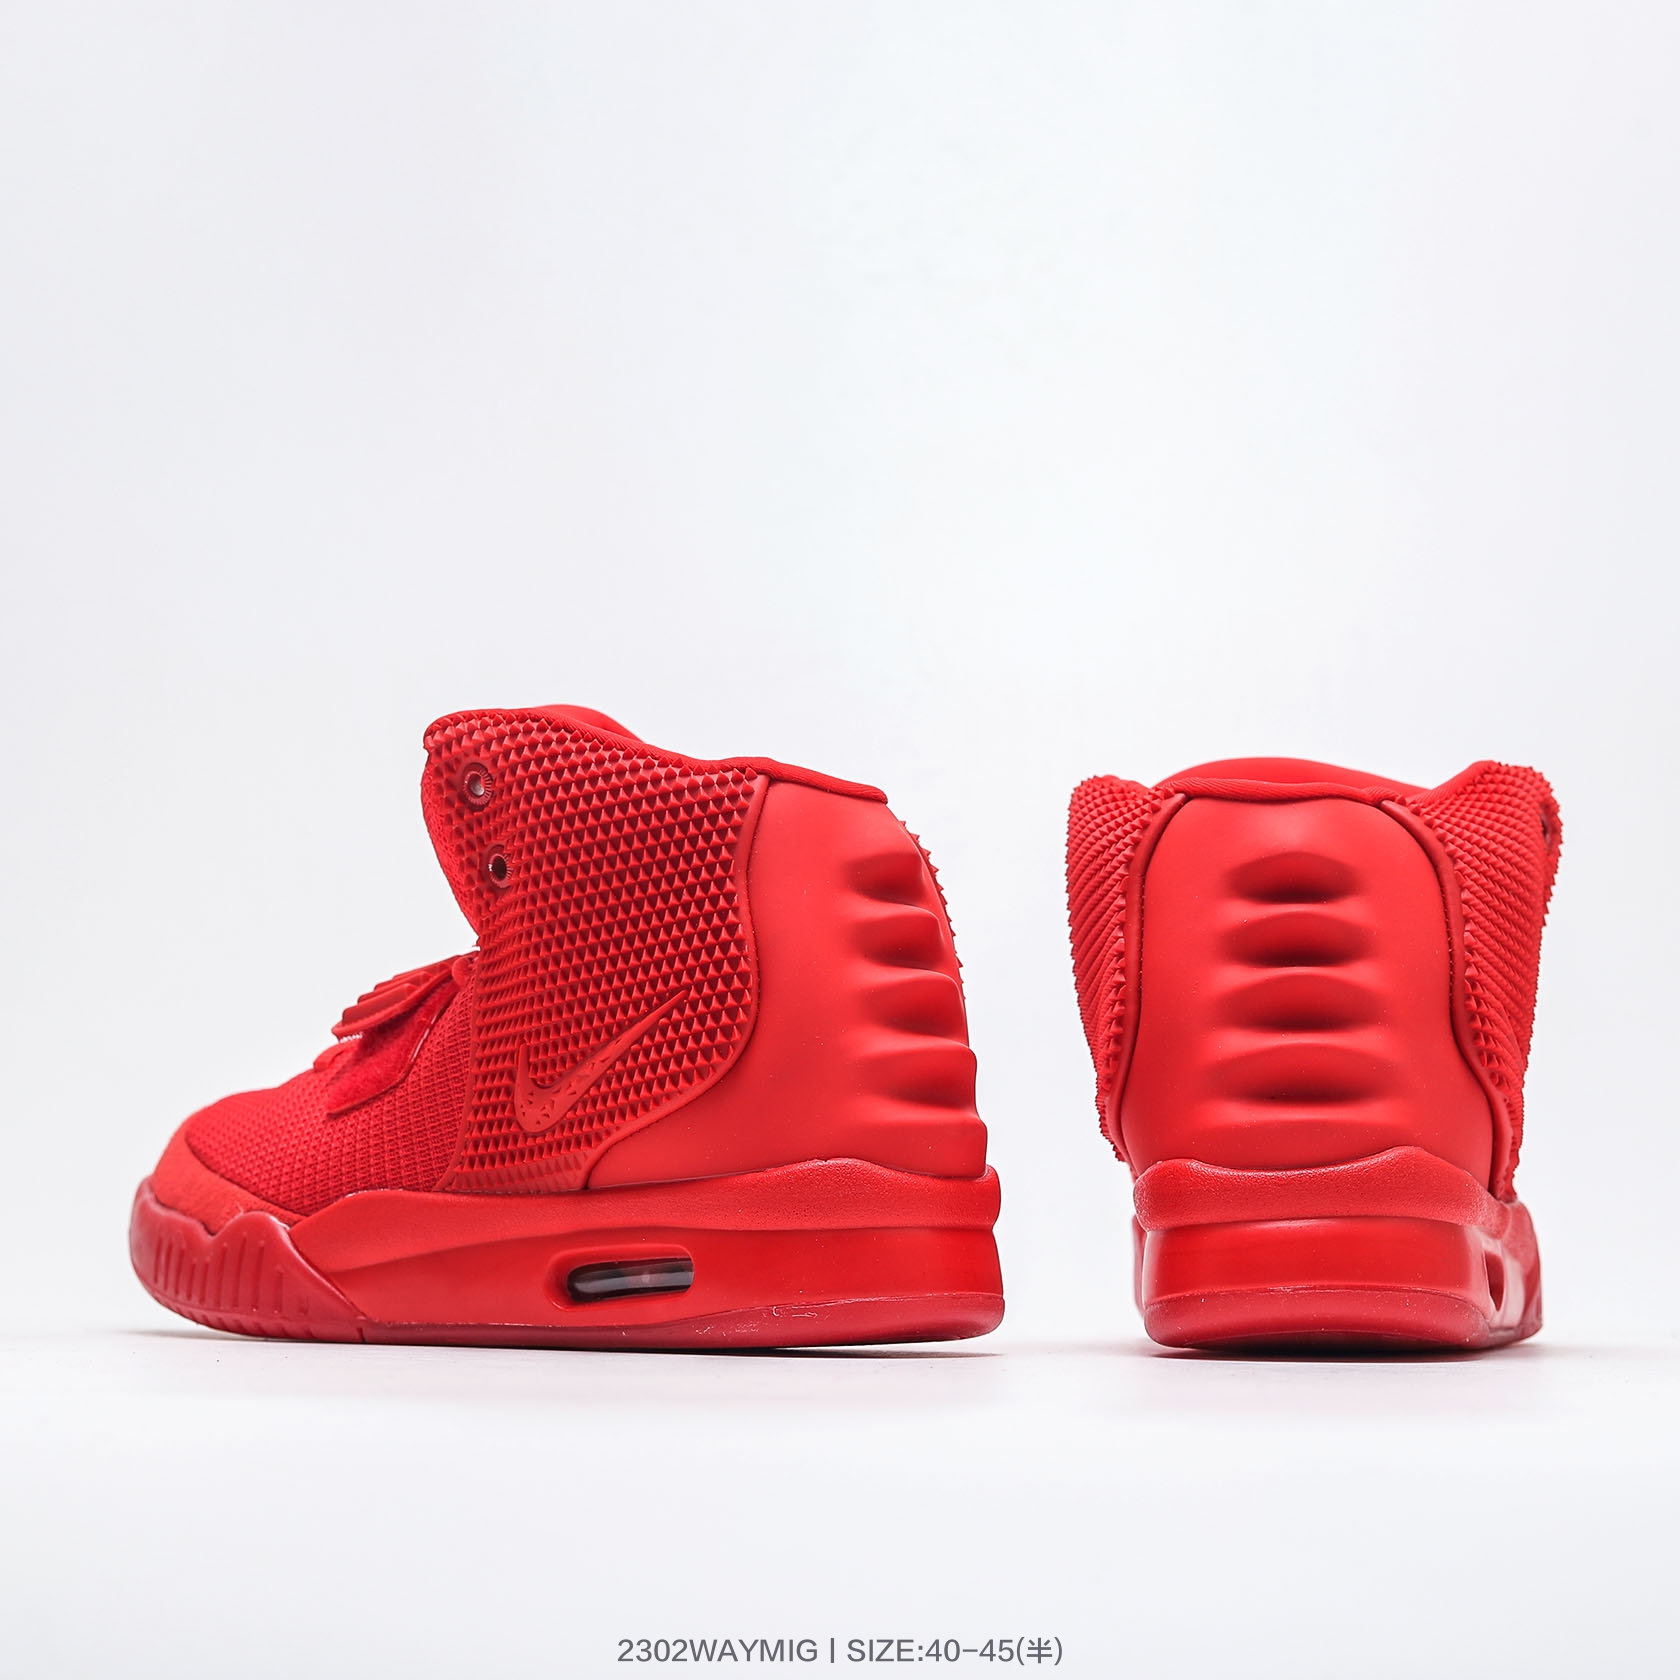 NIKE AIR YEEZY 2 USED SIZE 10 RED OCTOBER 508214 660 KANYE WEST